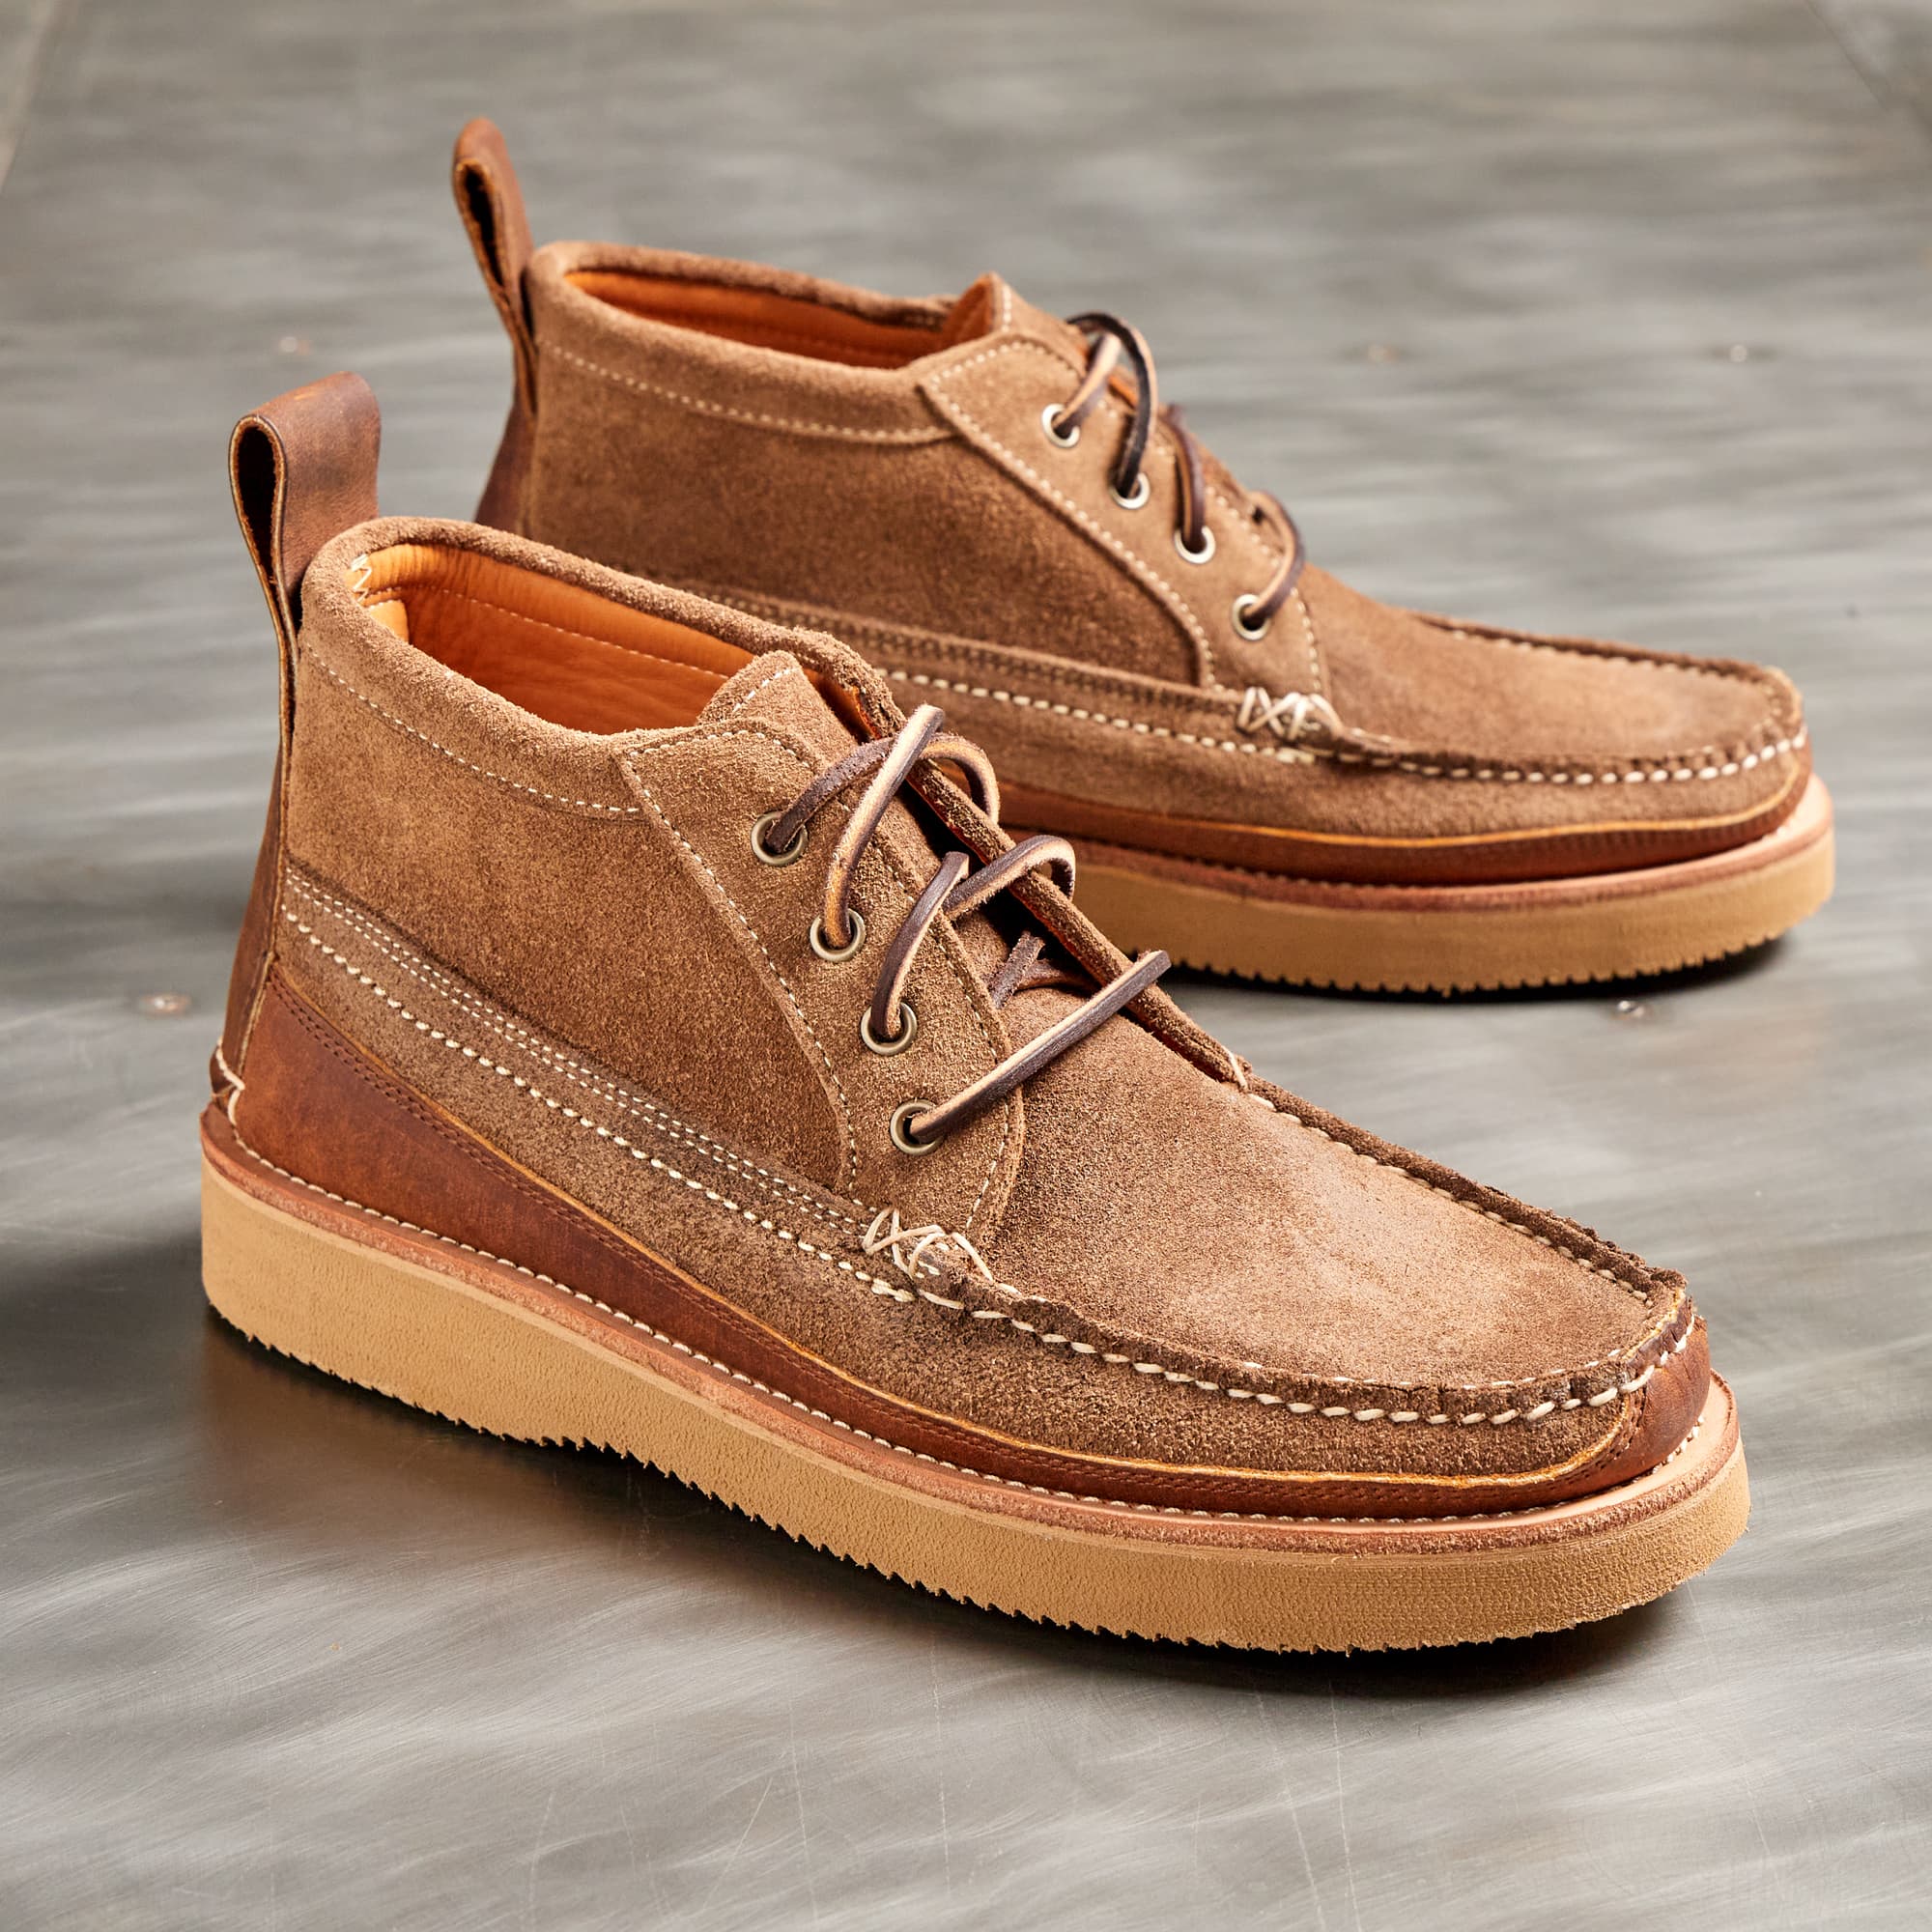 Division Road x Easymoc - Scout Boot - Hand Waxed Mole Suede and Trail Crazy Horse